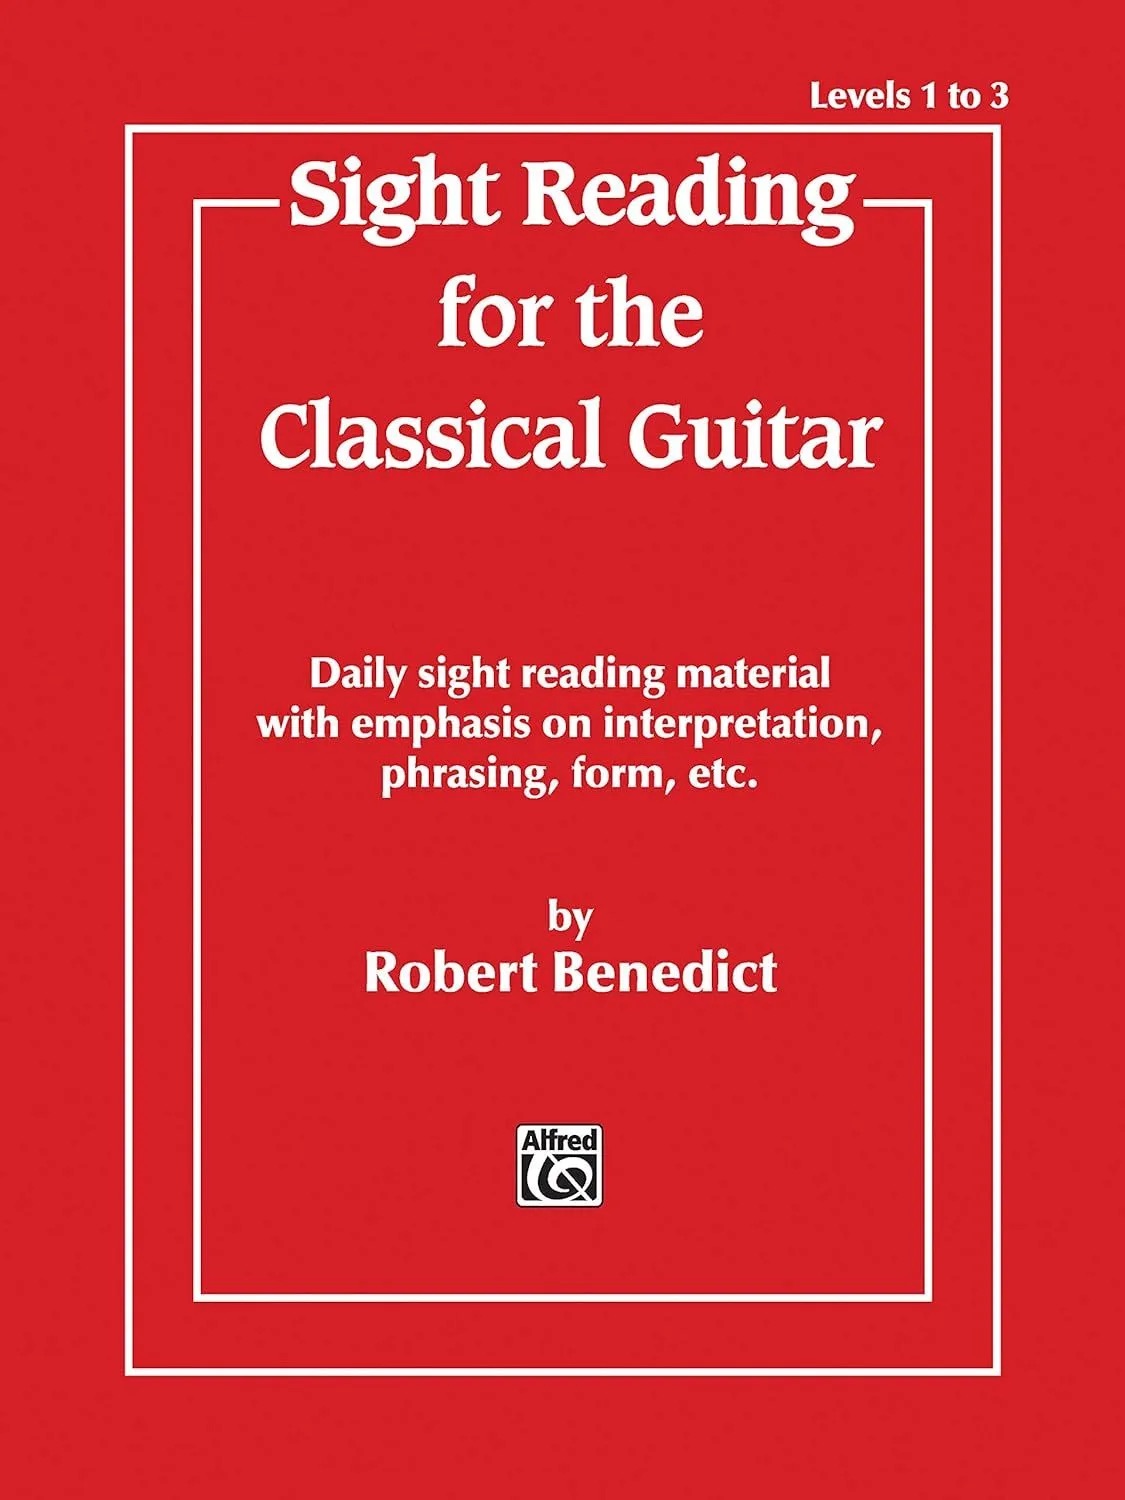 Sight Reading for the Classical Guitar book cover